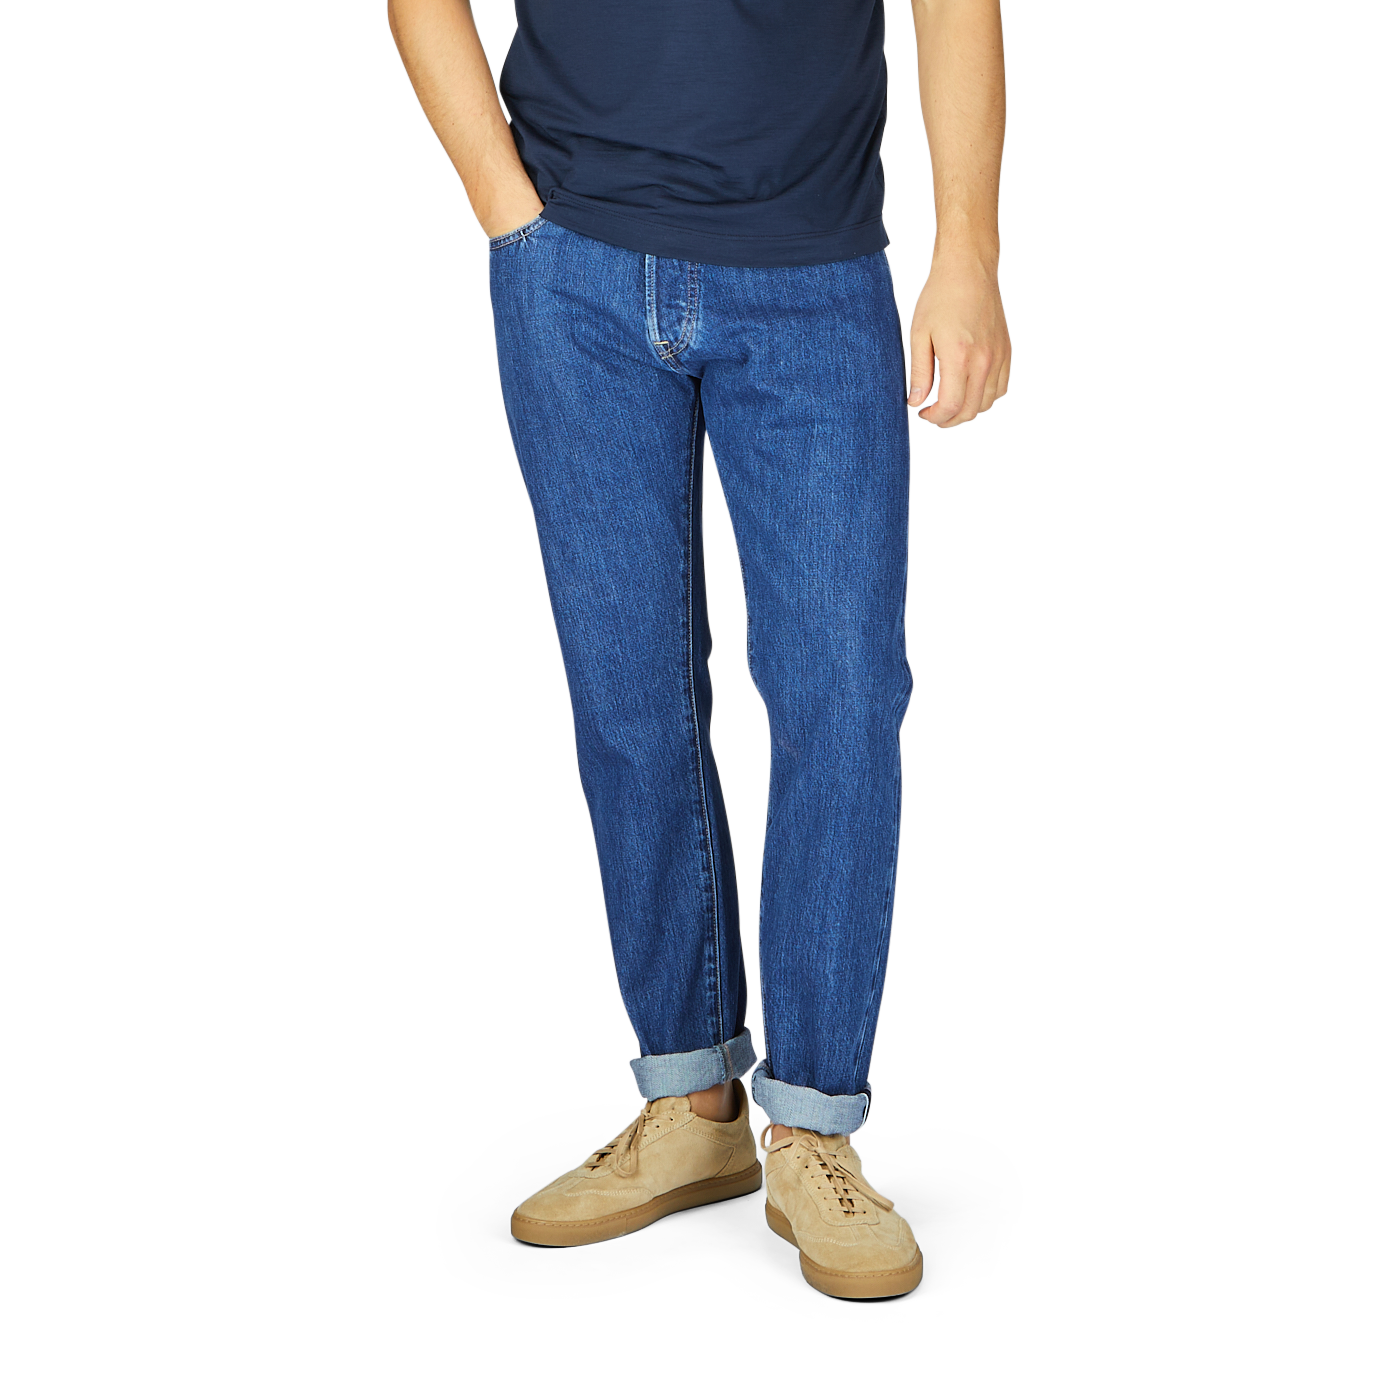 Man wearing C.O.F Studio Blue Organic Kurioki Cotton M7 6x Wash Jeans and beige shoes, cropped at chest level against a white background.